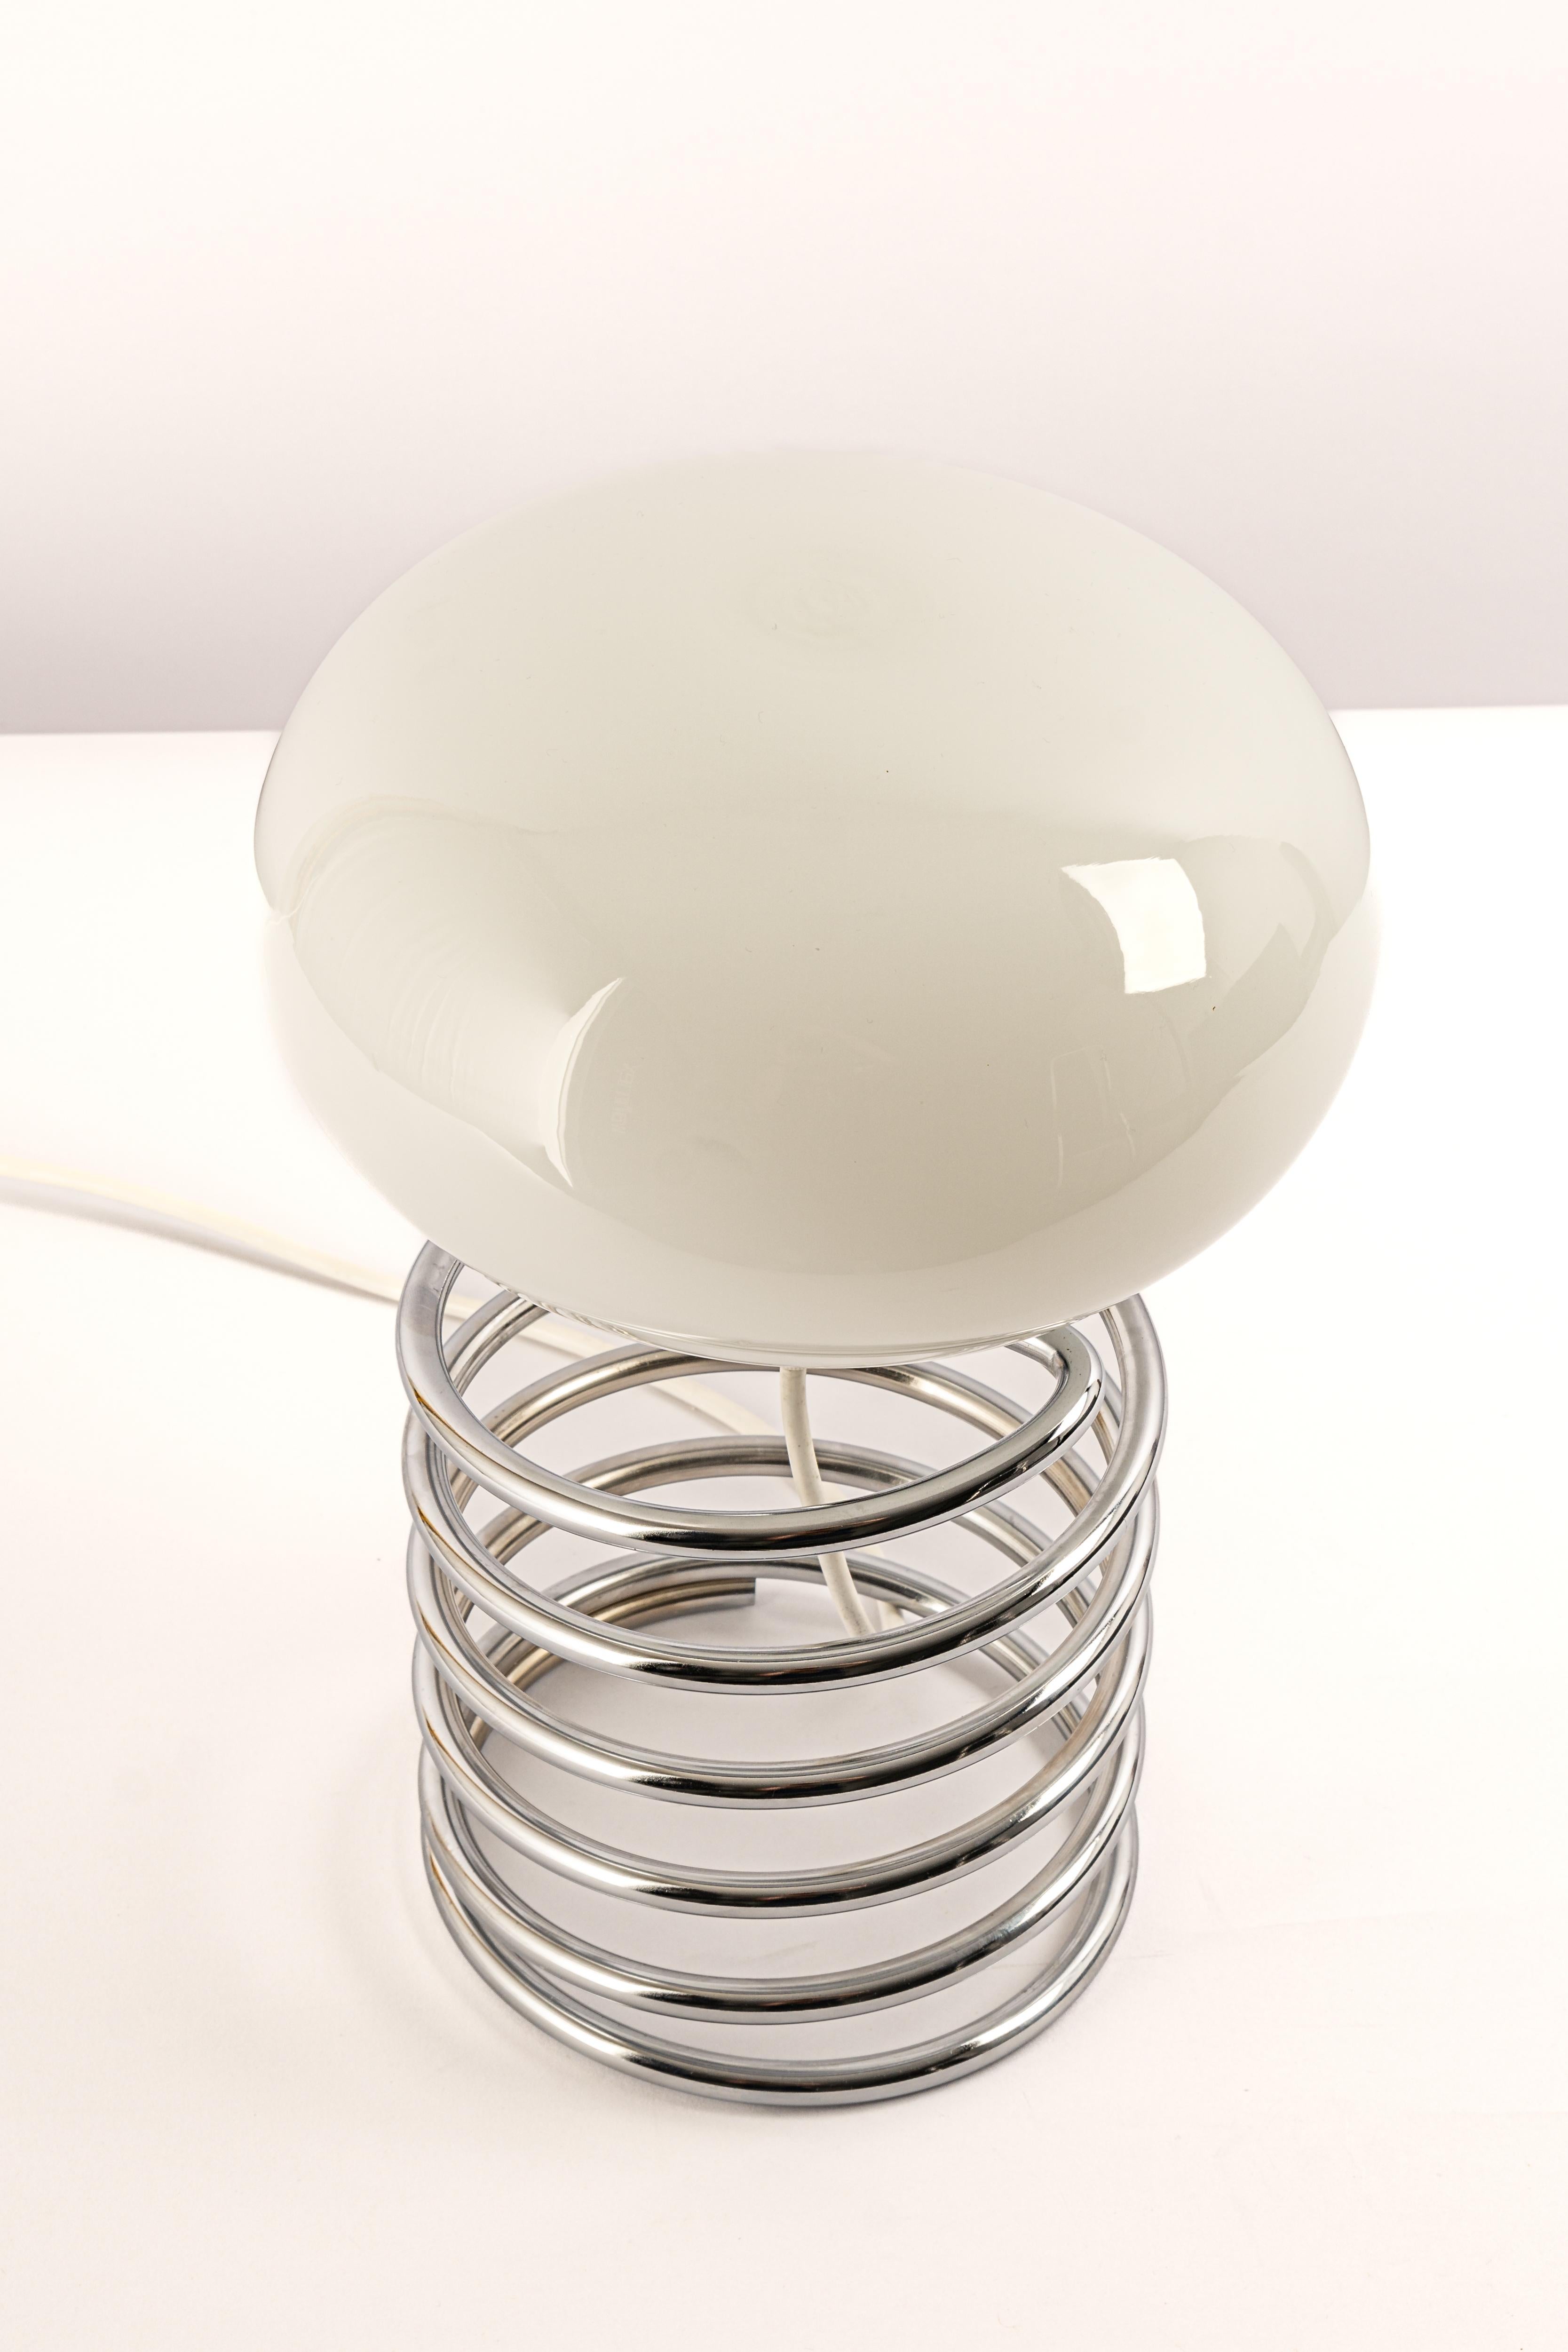 Wonderful Spiral table lamp in the style of Designer Ingo Maurer, Germany, 1970s. 
Great shape with a white glass shade on a chromed spiral steel base.

Socket: 1 x E27 standard bulb.
Light bulbs are not included. It is possible to install this